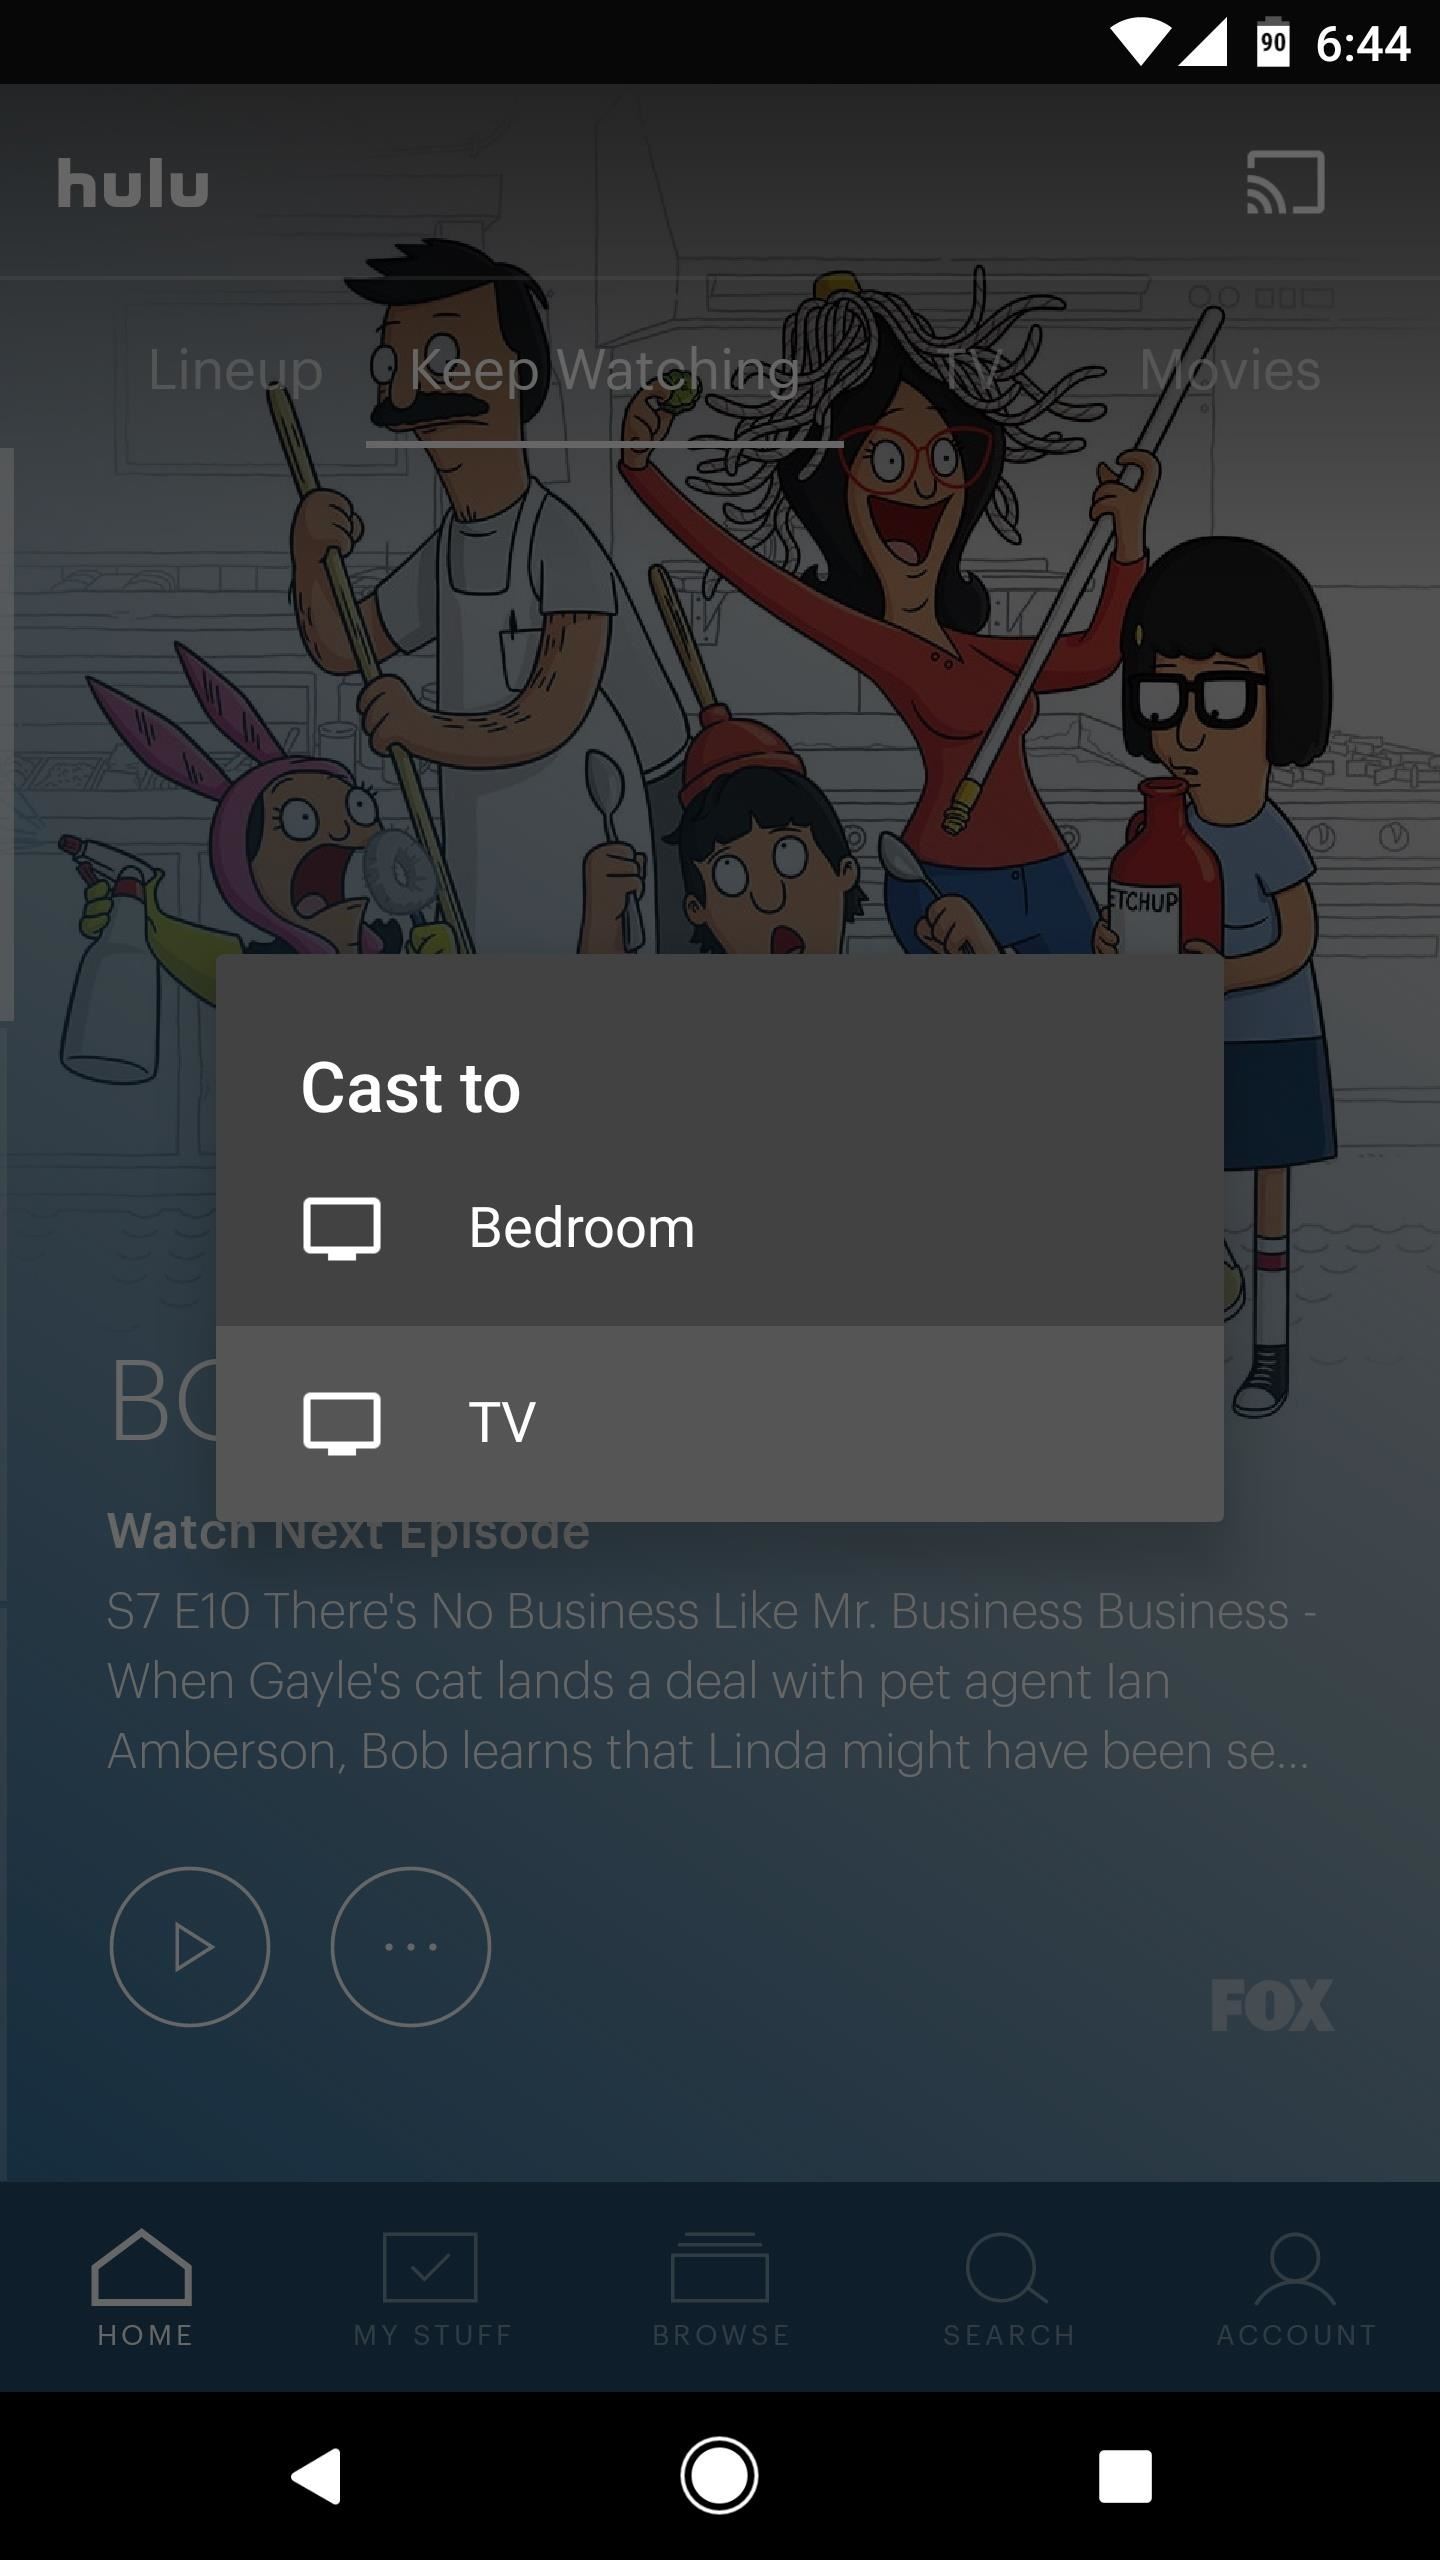 Hulu 101: How to Cast Shows & Movies to Your TV